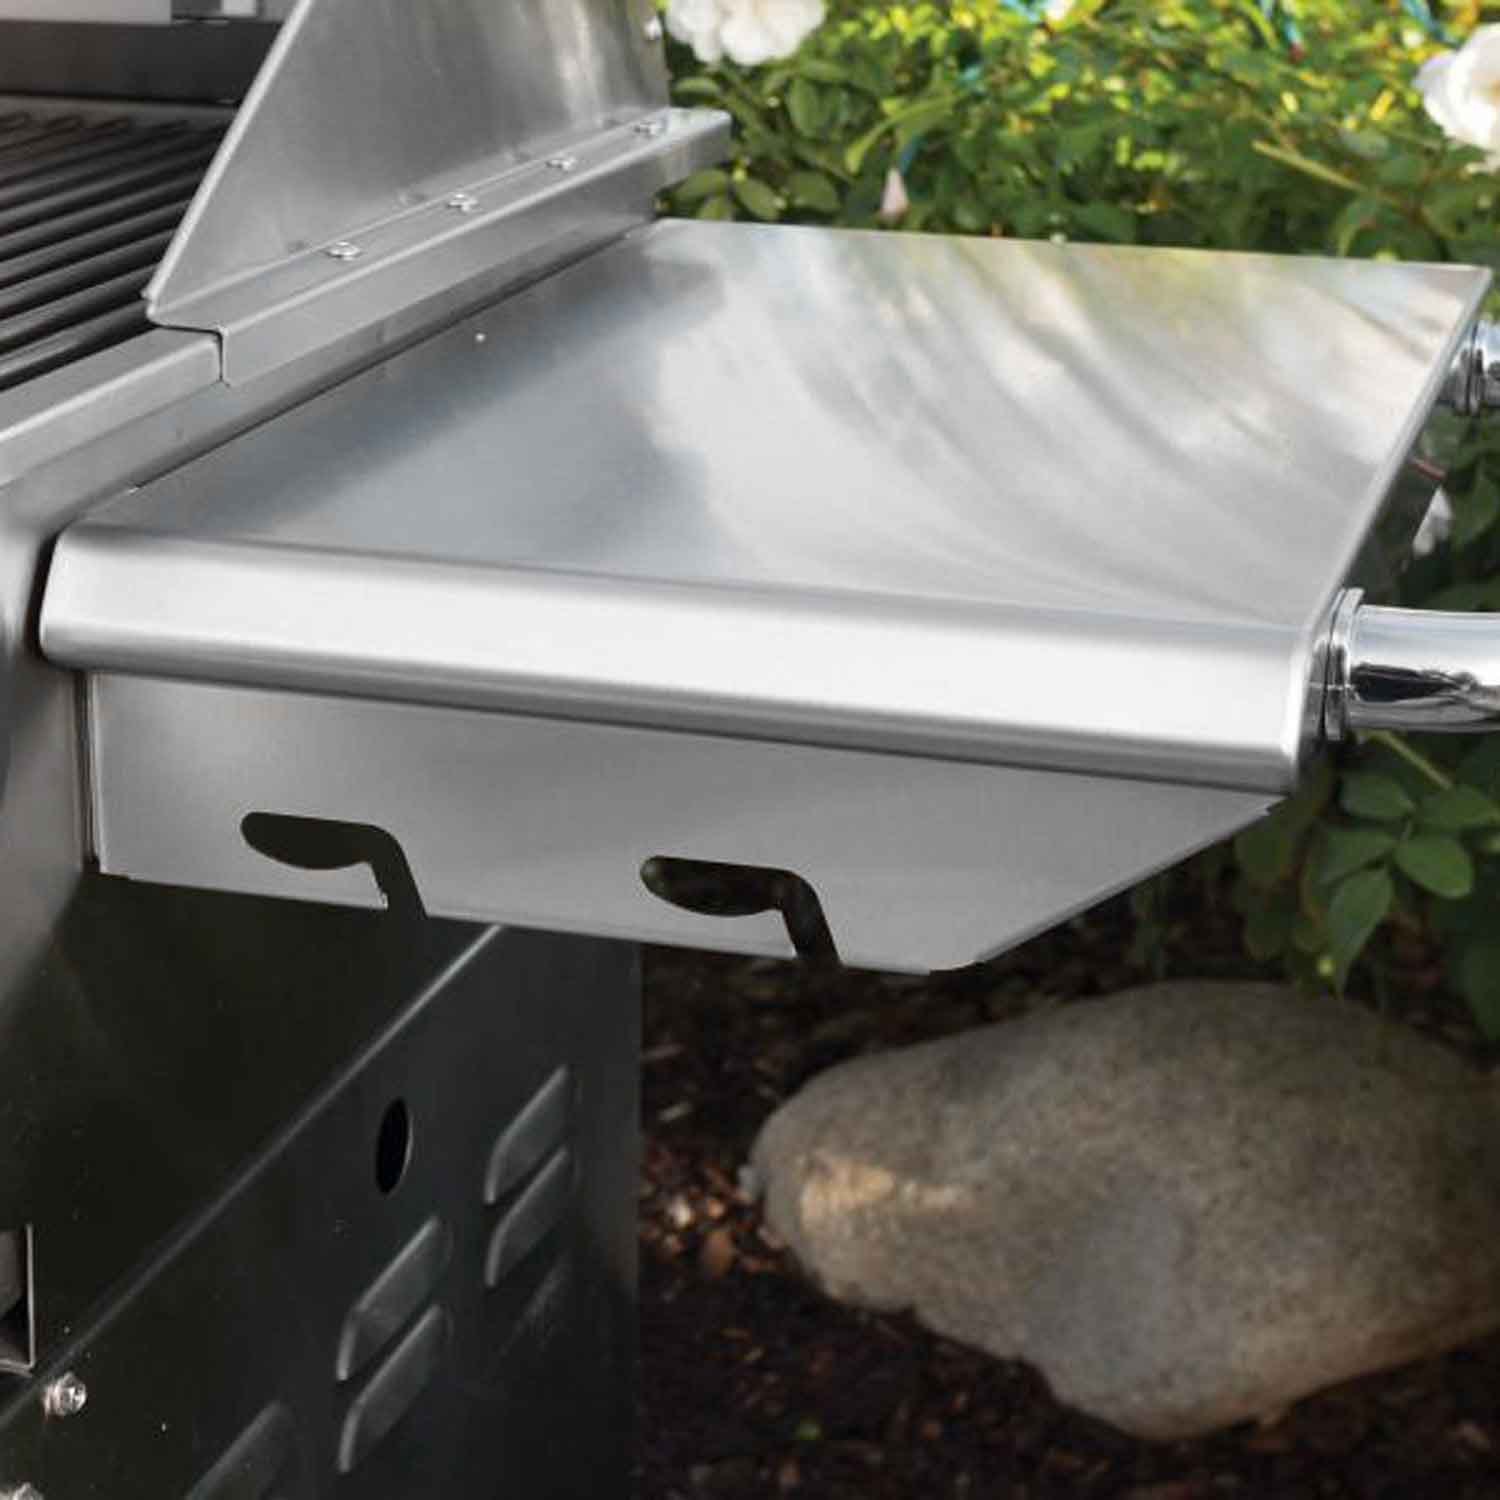 Bull Outdoor Products Angus 4-Burner Propane Gas Grill with Cabinet - image 5 of 8